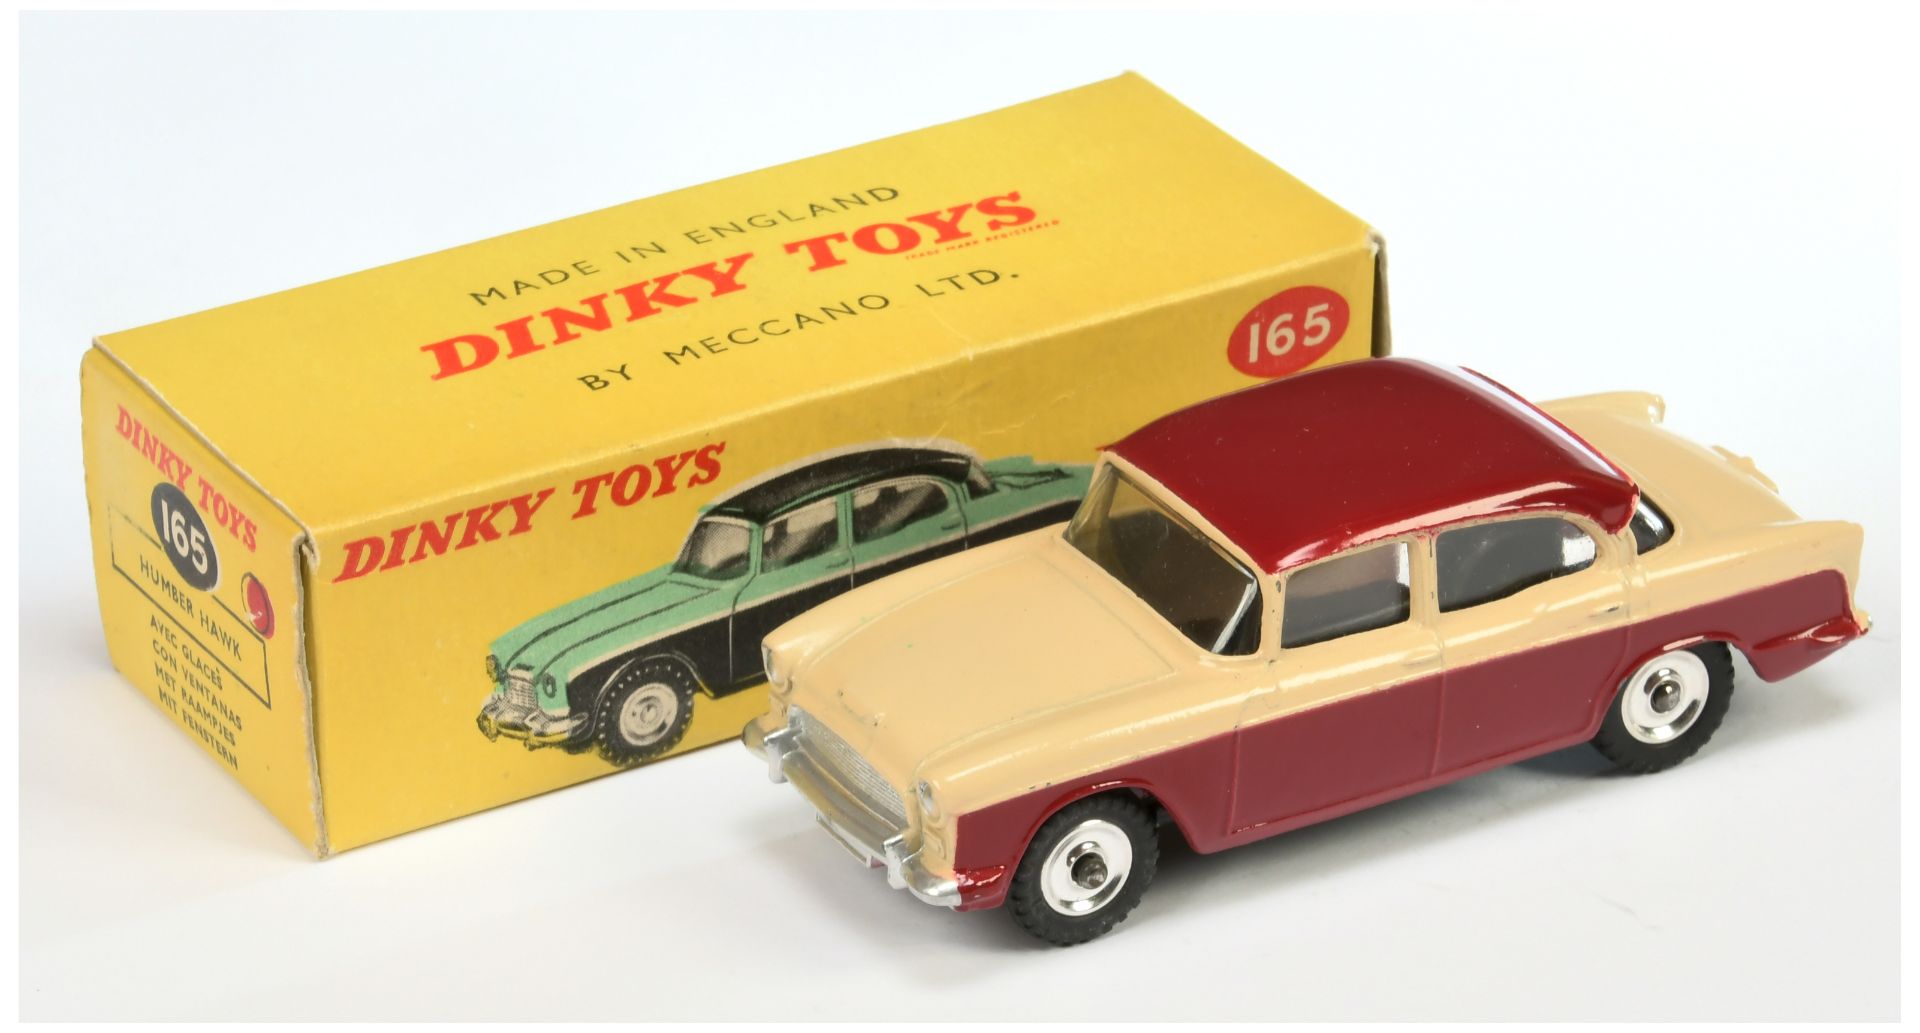 Dinky Toys 165 Humber Hawk Saloon Two-Tone Maroon and beige, silver trim and spun hubs 